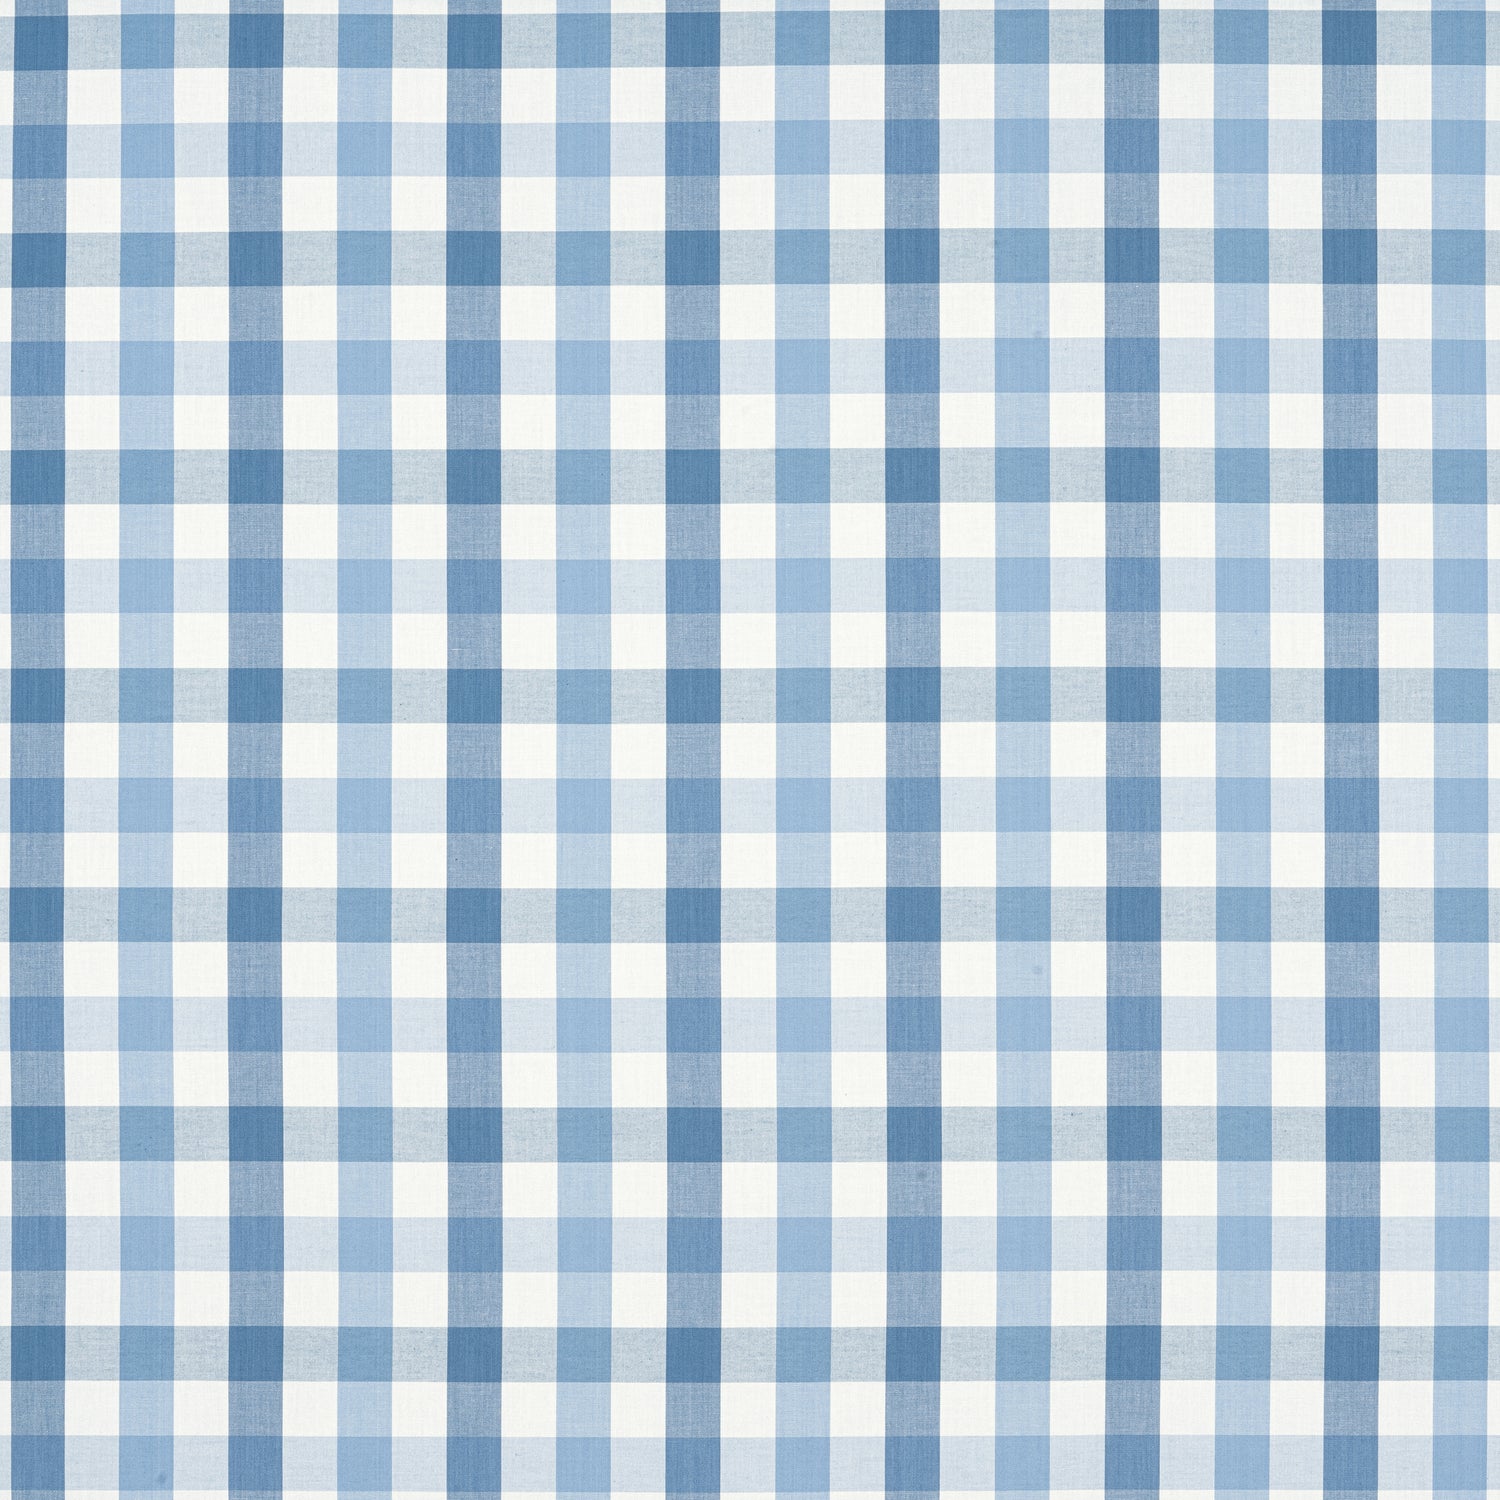 Saybrook Check fabric in light blue color - pattern number AW15147 - by Anna French in the Antilles collection